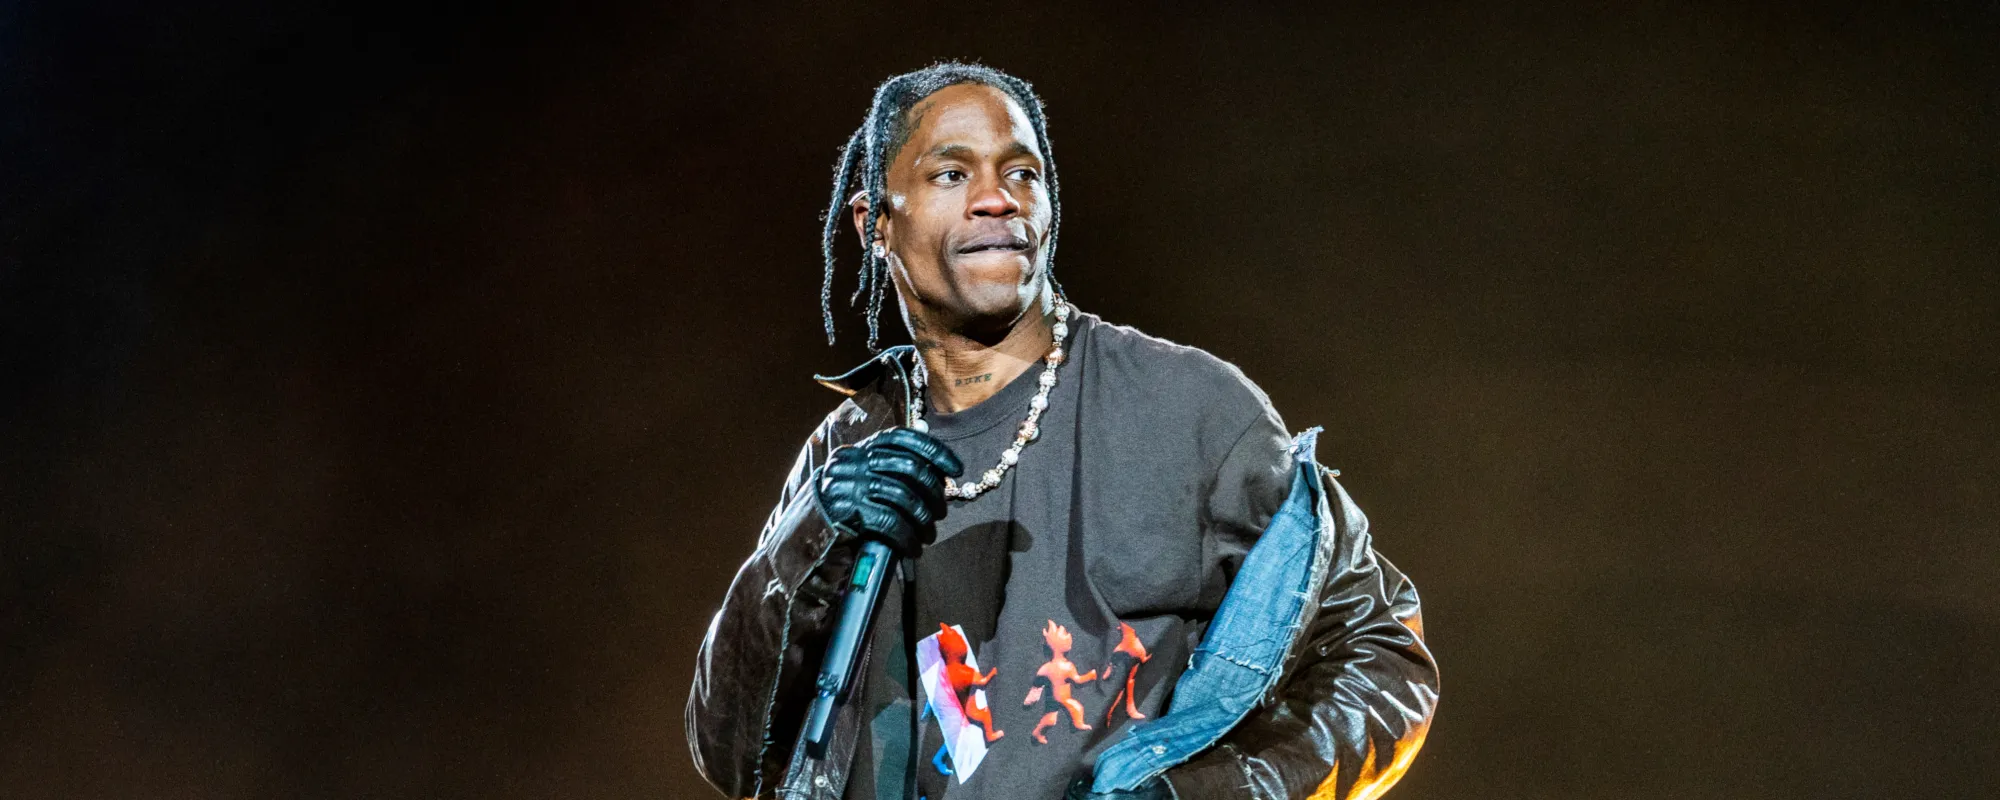 Grandparents of Youngest Astroworld Victim Call Travis Scott’s New Safety Charity “PR Stunt”